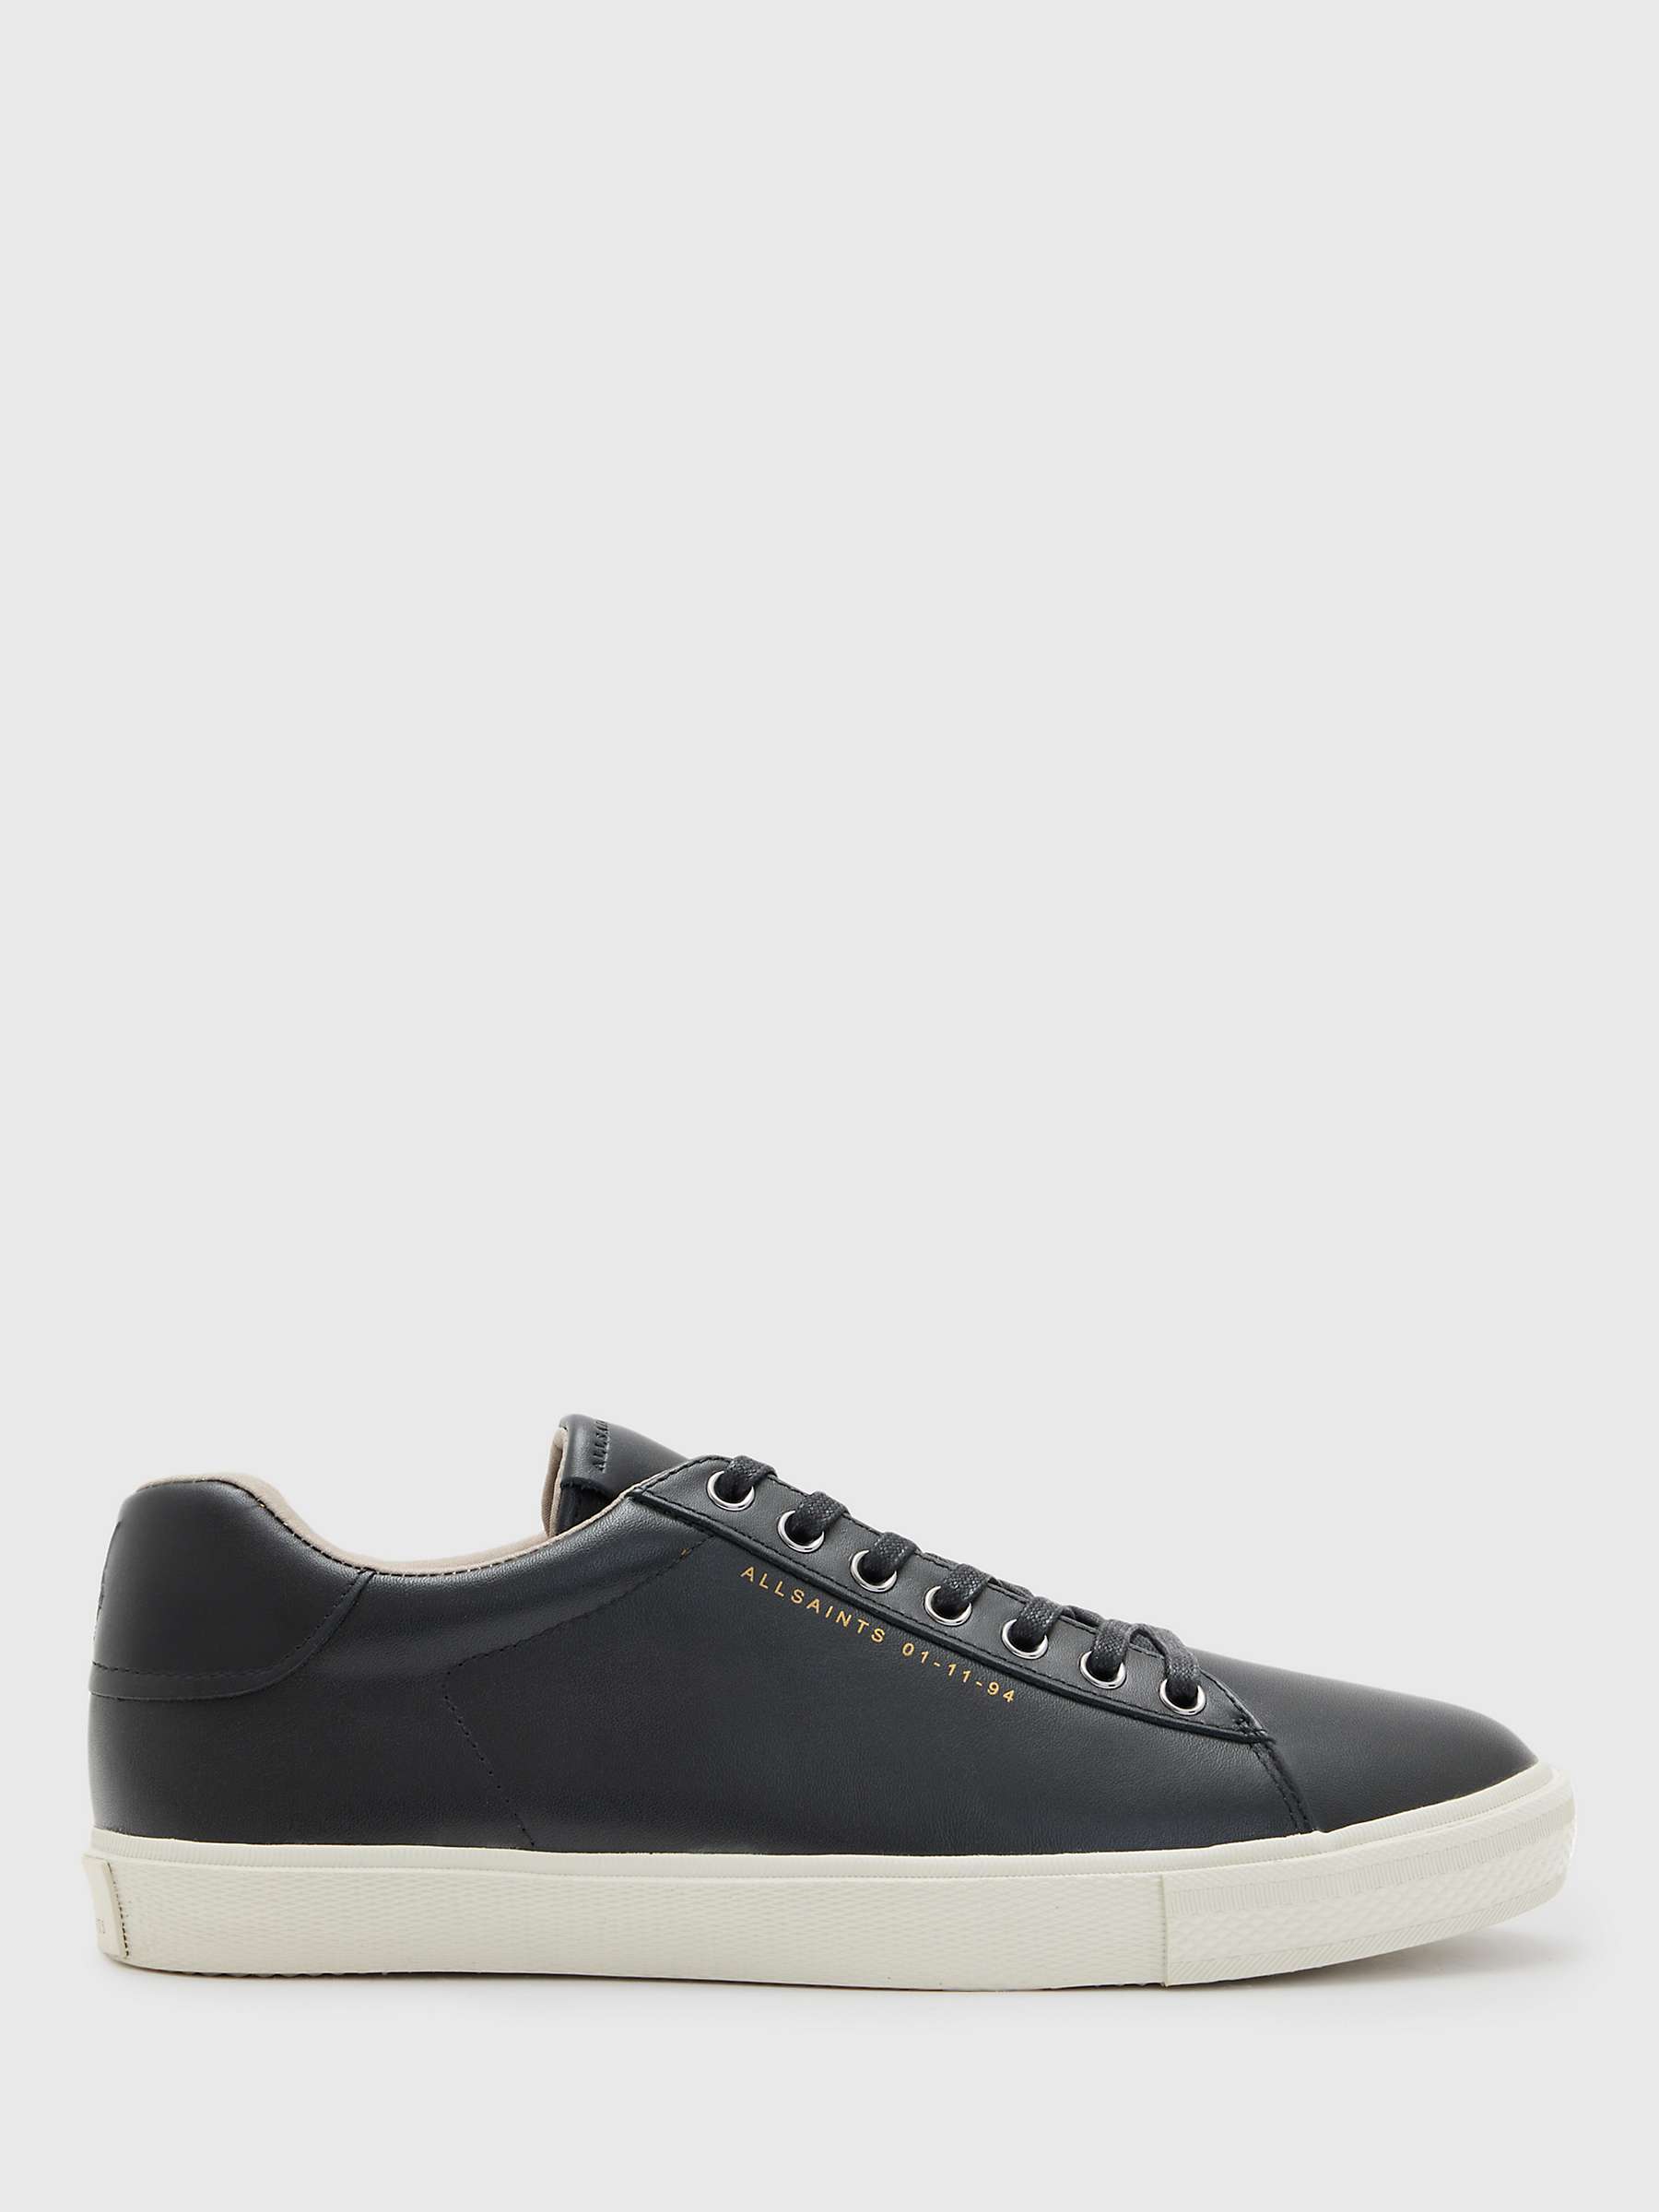 AllSaints Brody Leather Low Top Trainers, Black at John Lewis & Partners